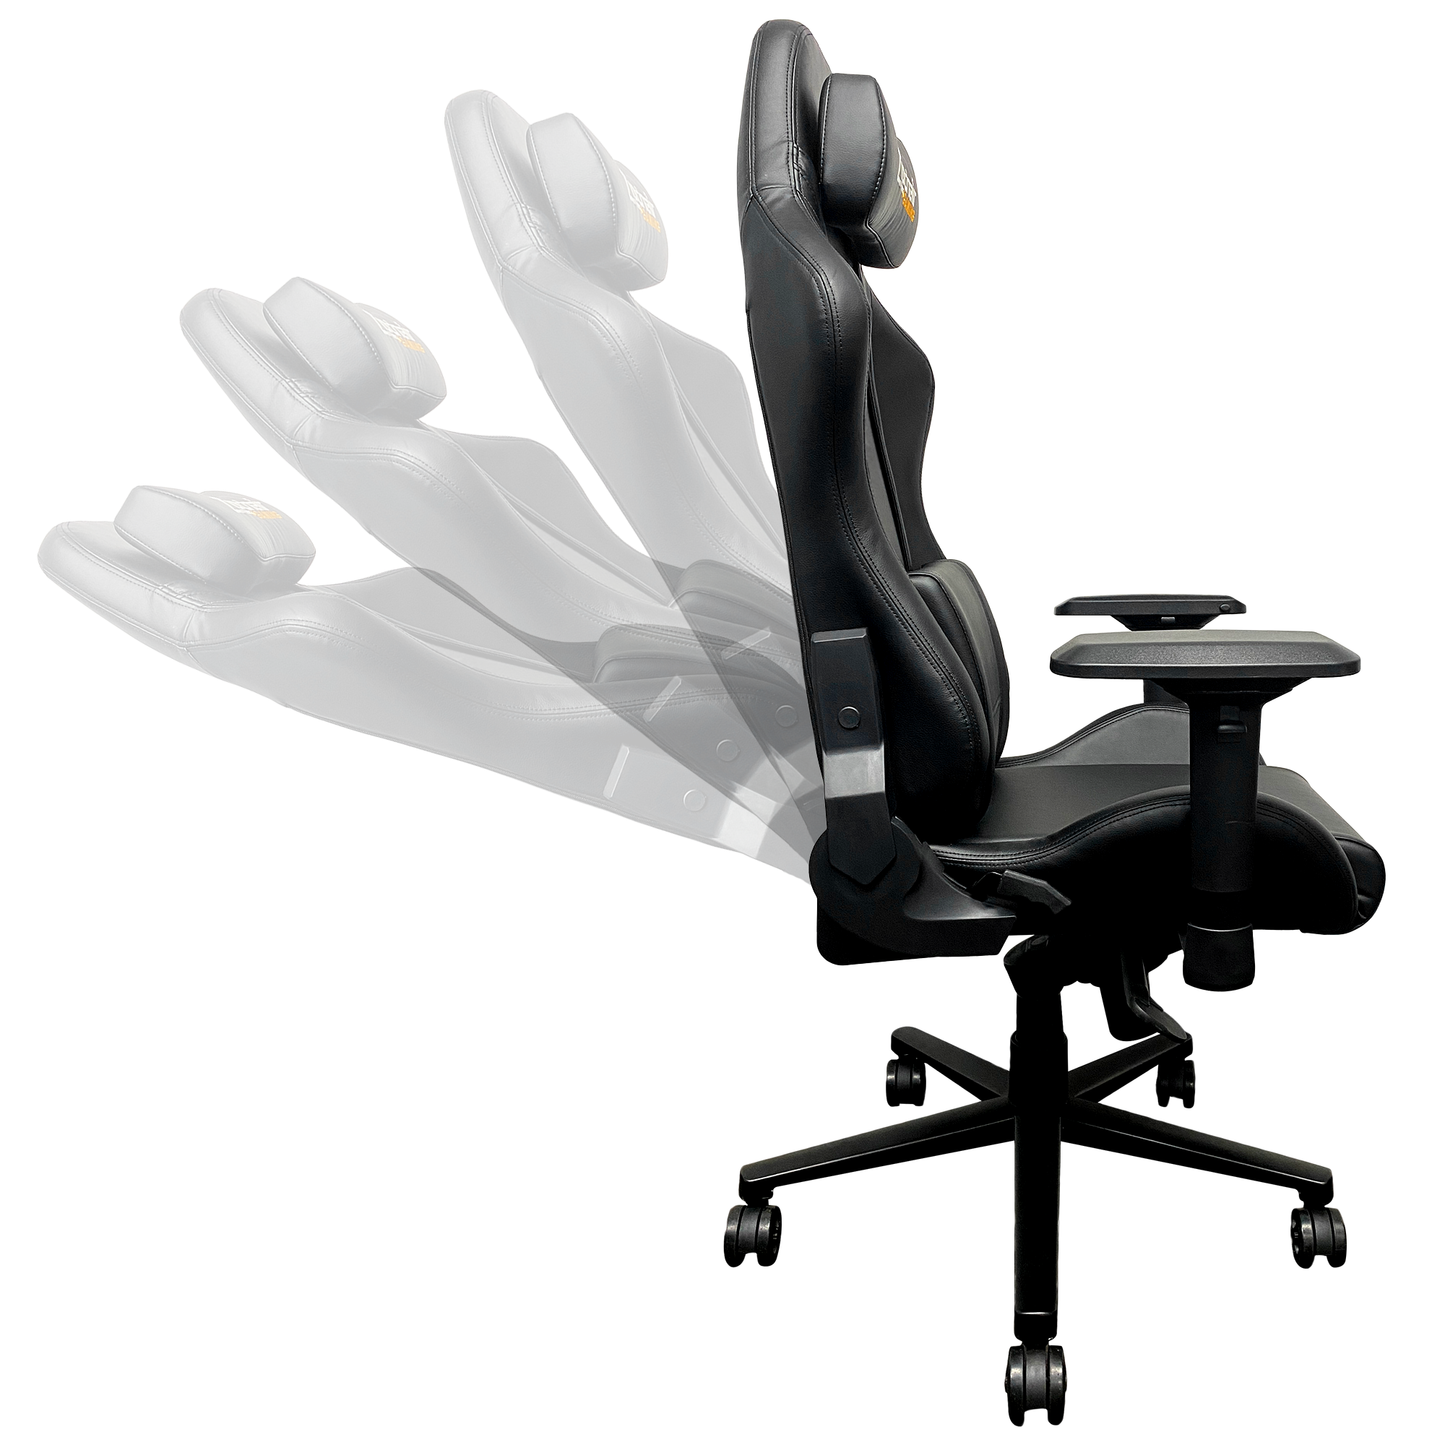 Xpression Pro Gaming Chair with Phoenix Suns Logo